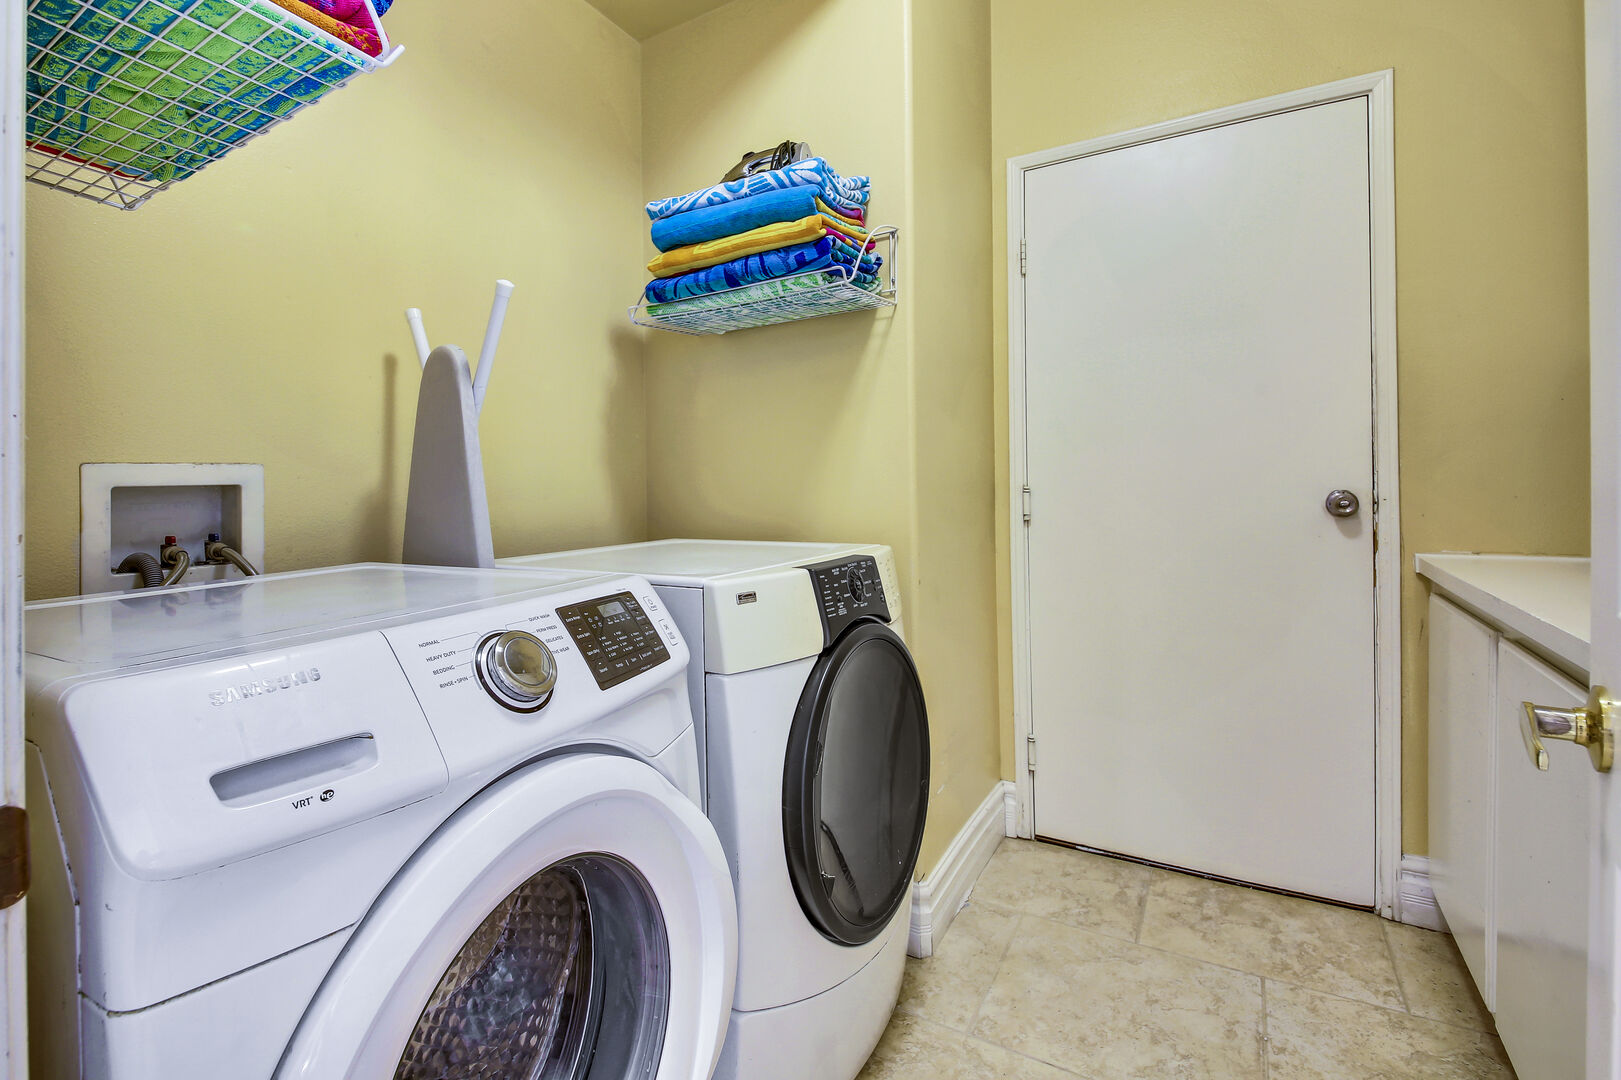 Fully equipped laundry room with washer, dryer, iron, ironing board, and laundry pods.